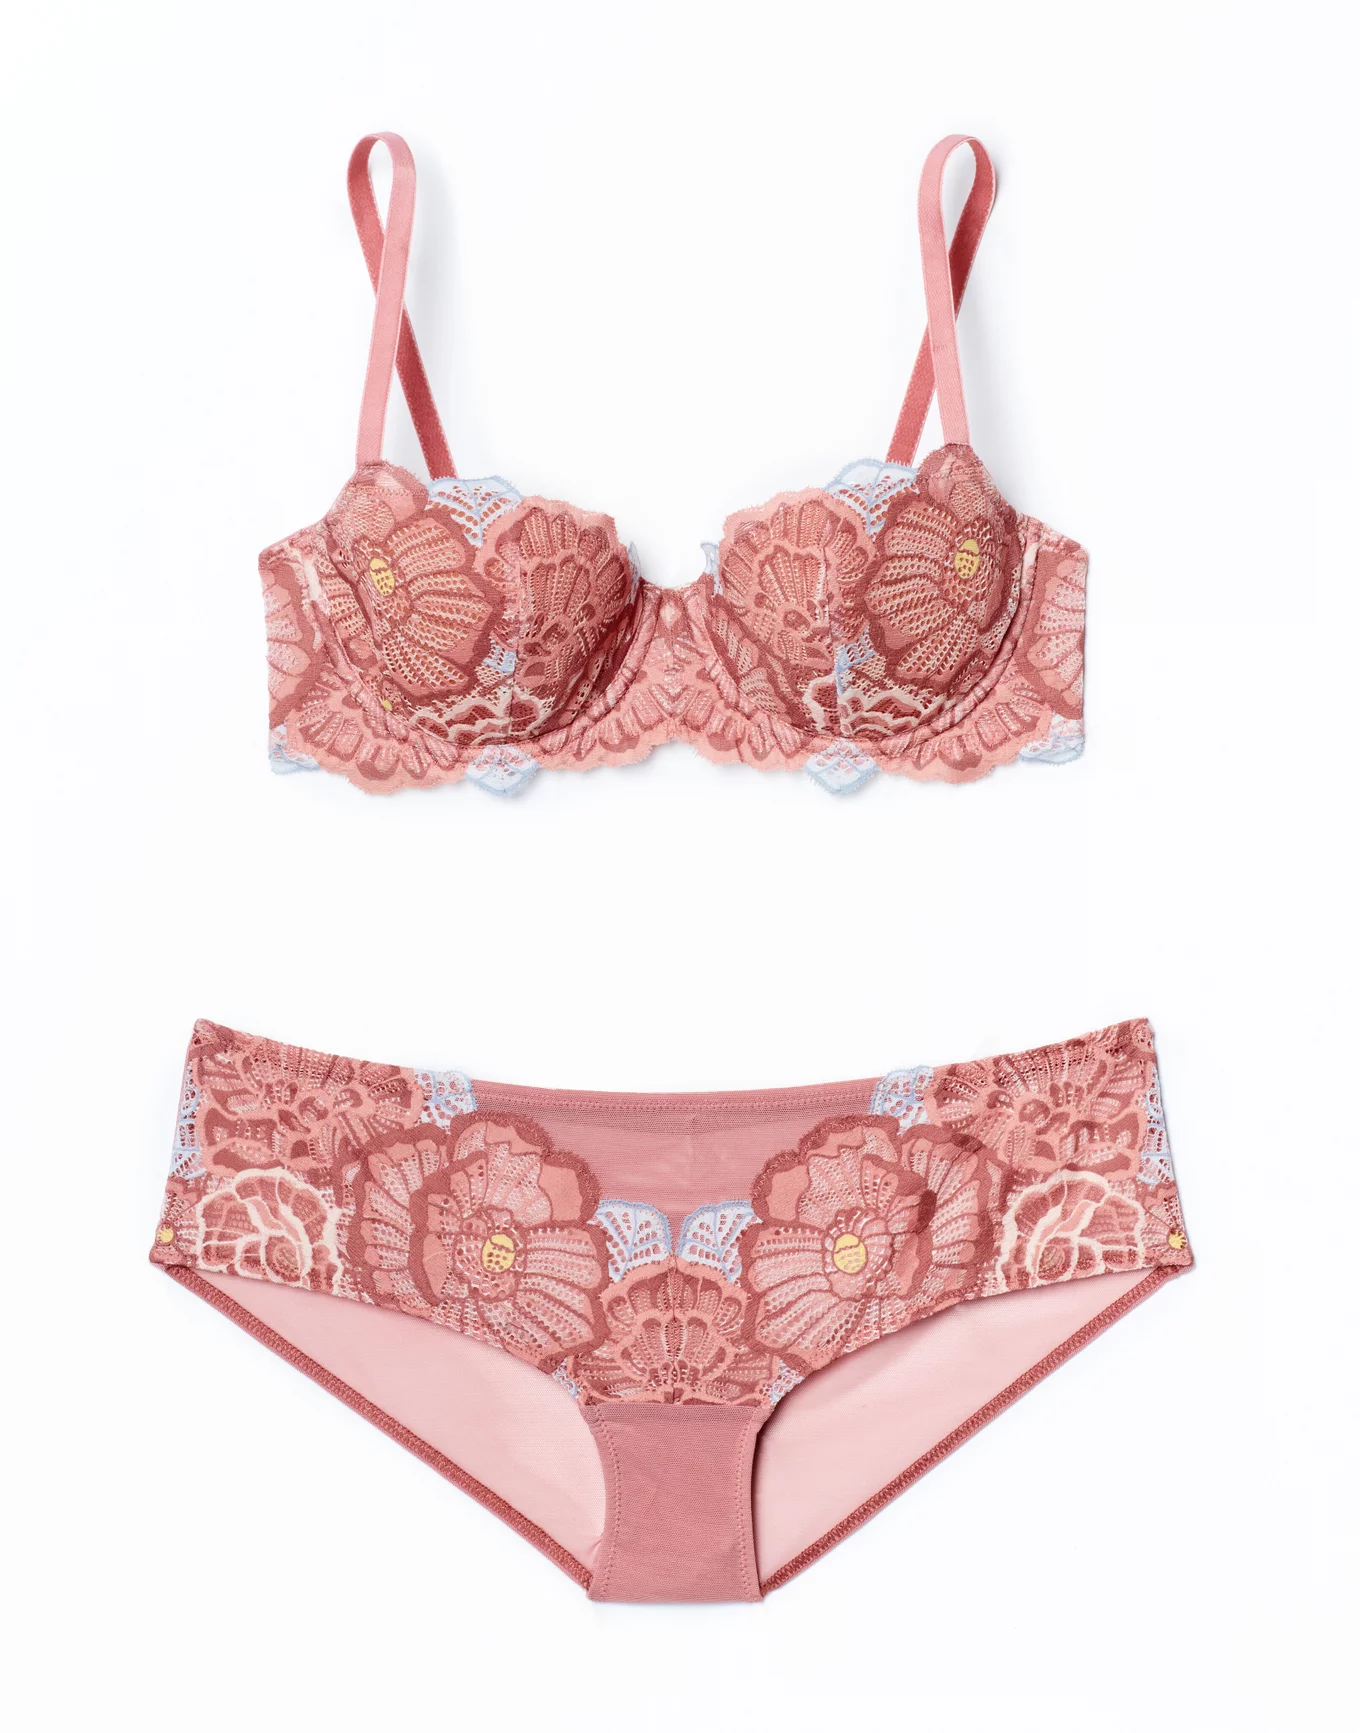 M For Love & Lemons One Size Cup Women's Bras & Bra Sets for sale